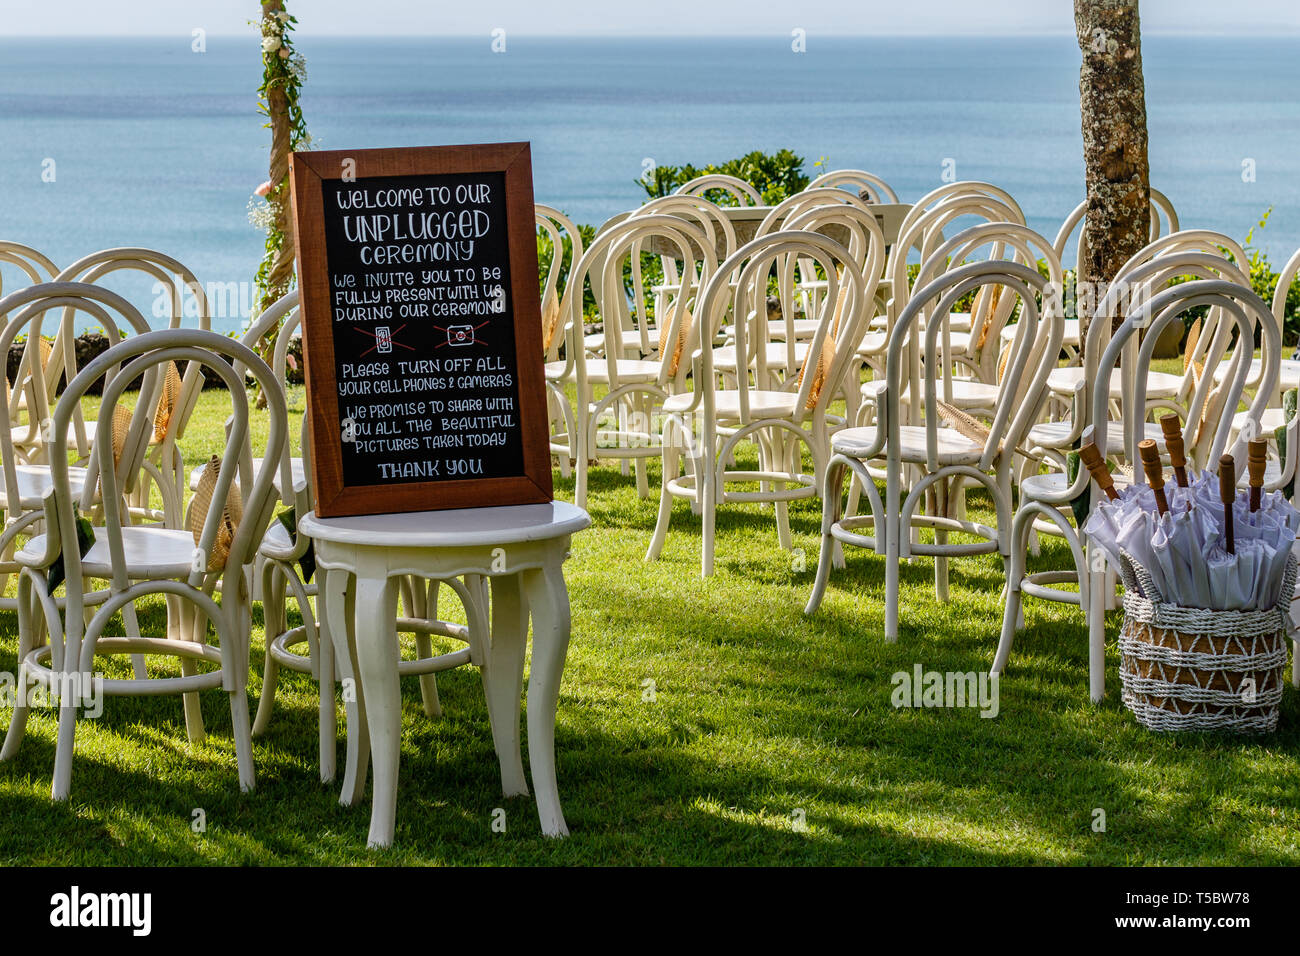 Wedding arch for a ceremony, chairs and sun umbrellas for guests among palm trees near the ocean. Blackboard sign saying to turn cell phones off. Stock Photo